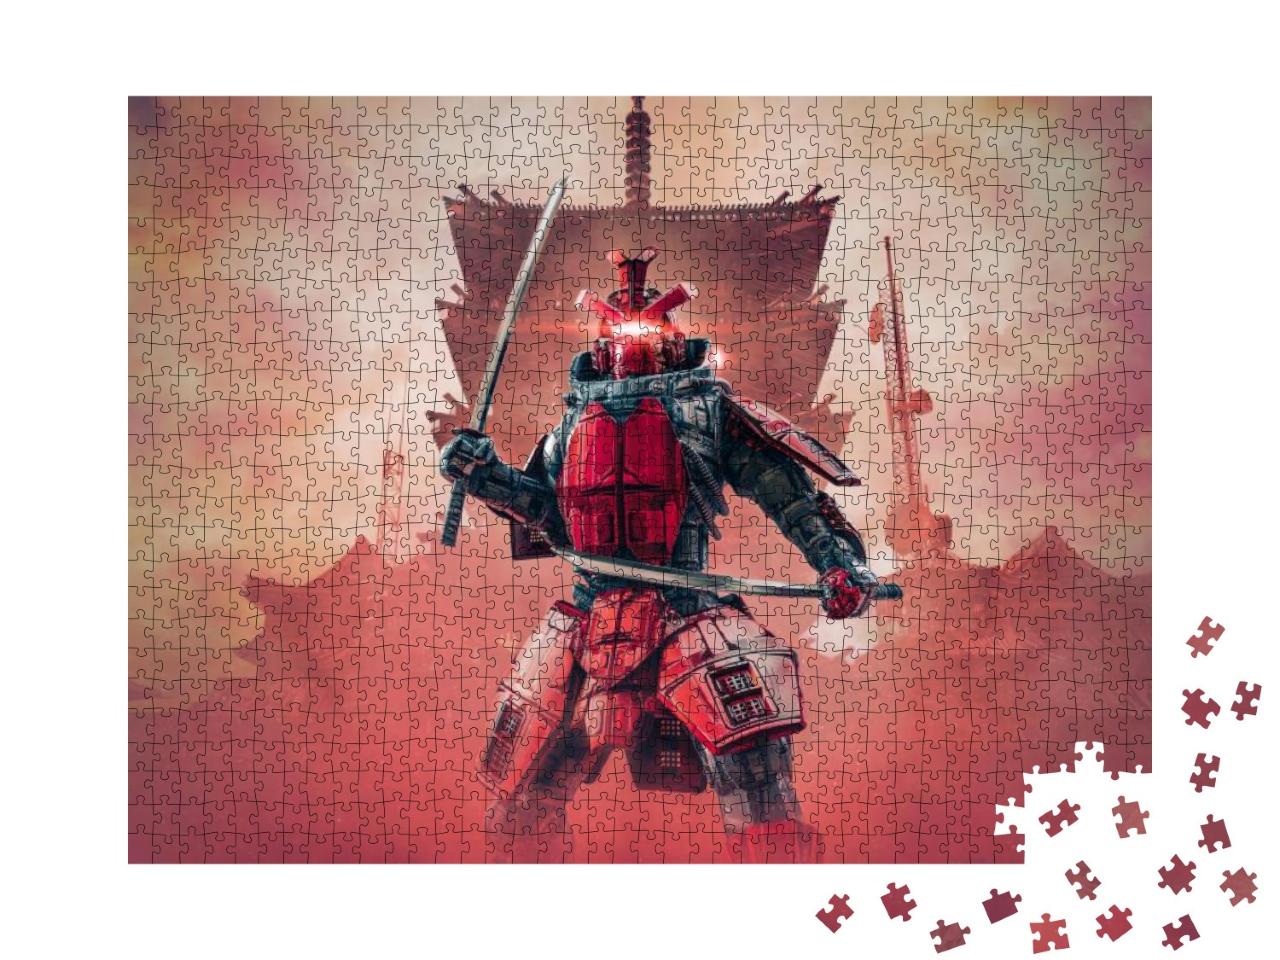 Cyborg Samurai Warrior - 3D Illustration of Science Ficti... Jigsaw Puzzle with 1000 pieces